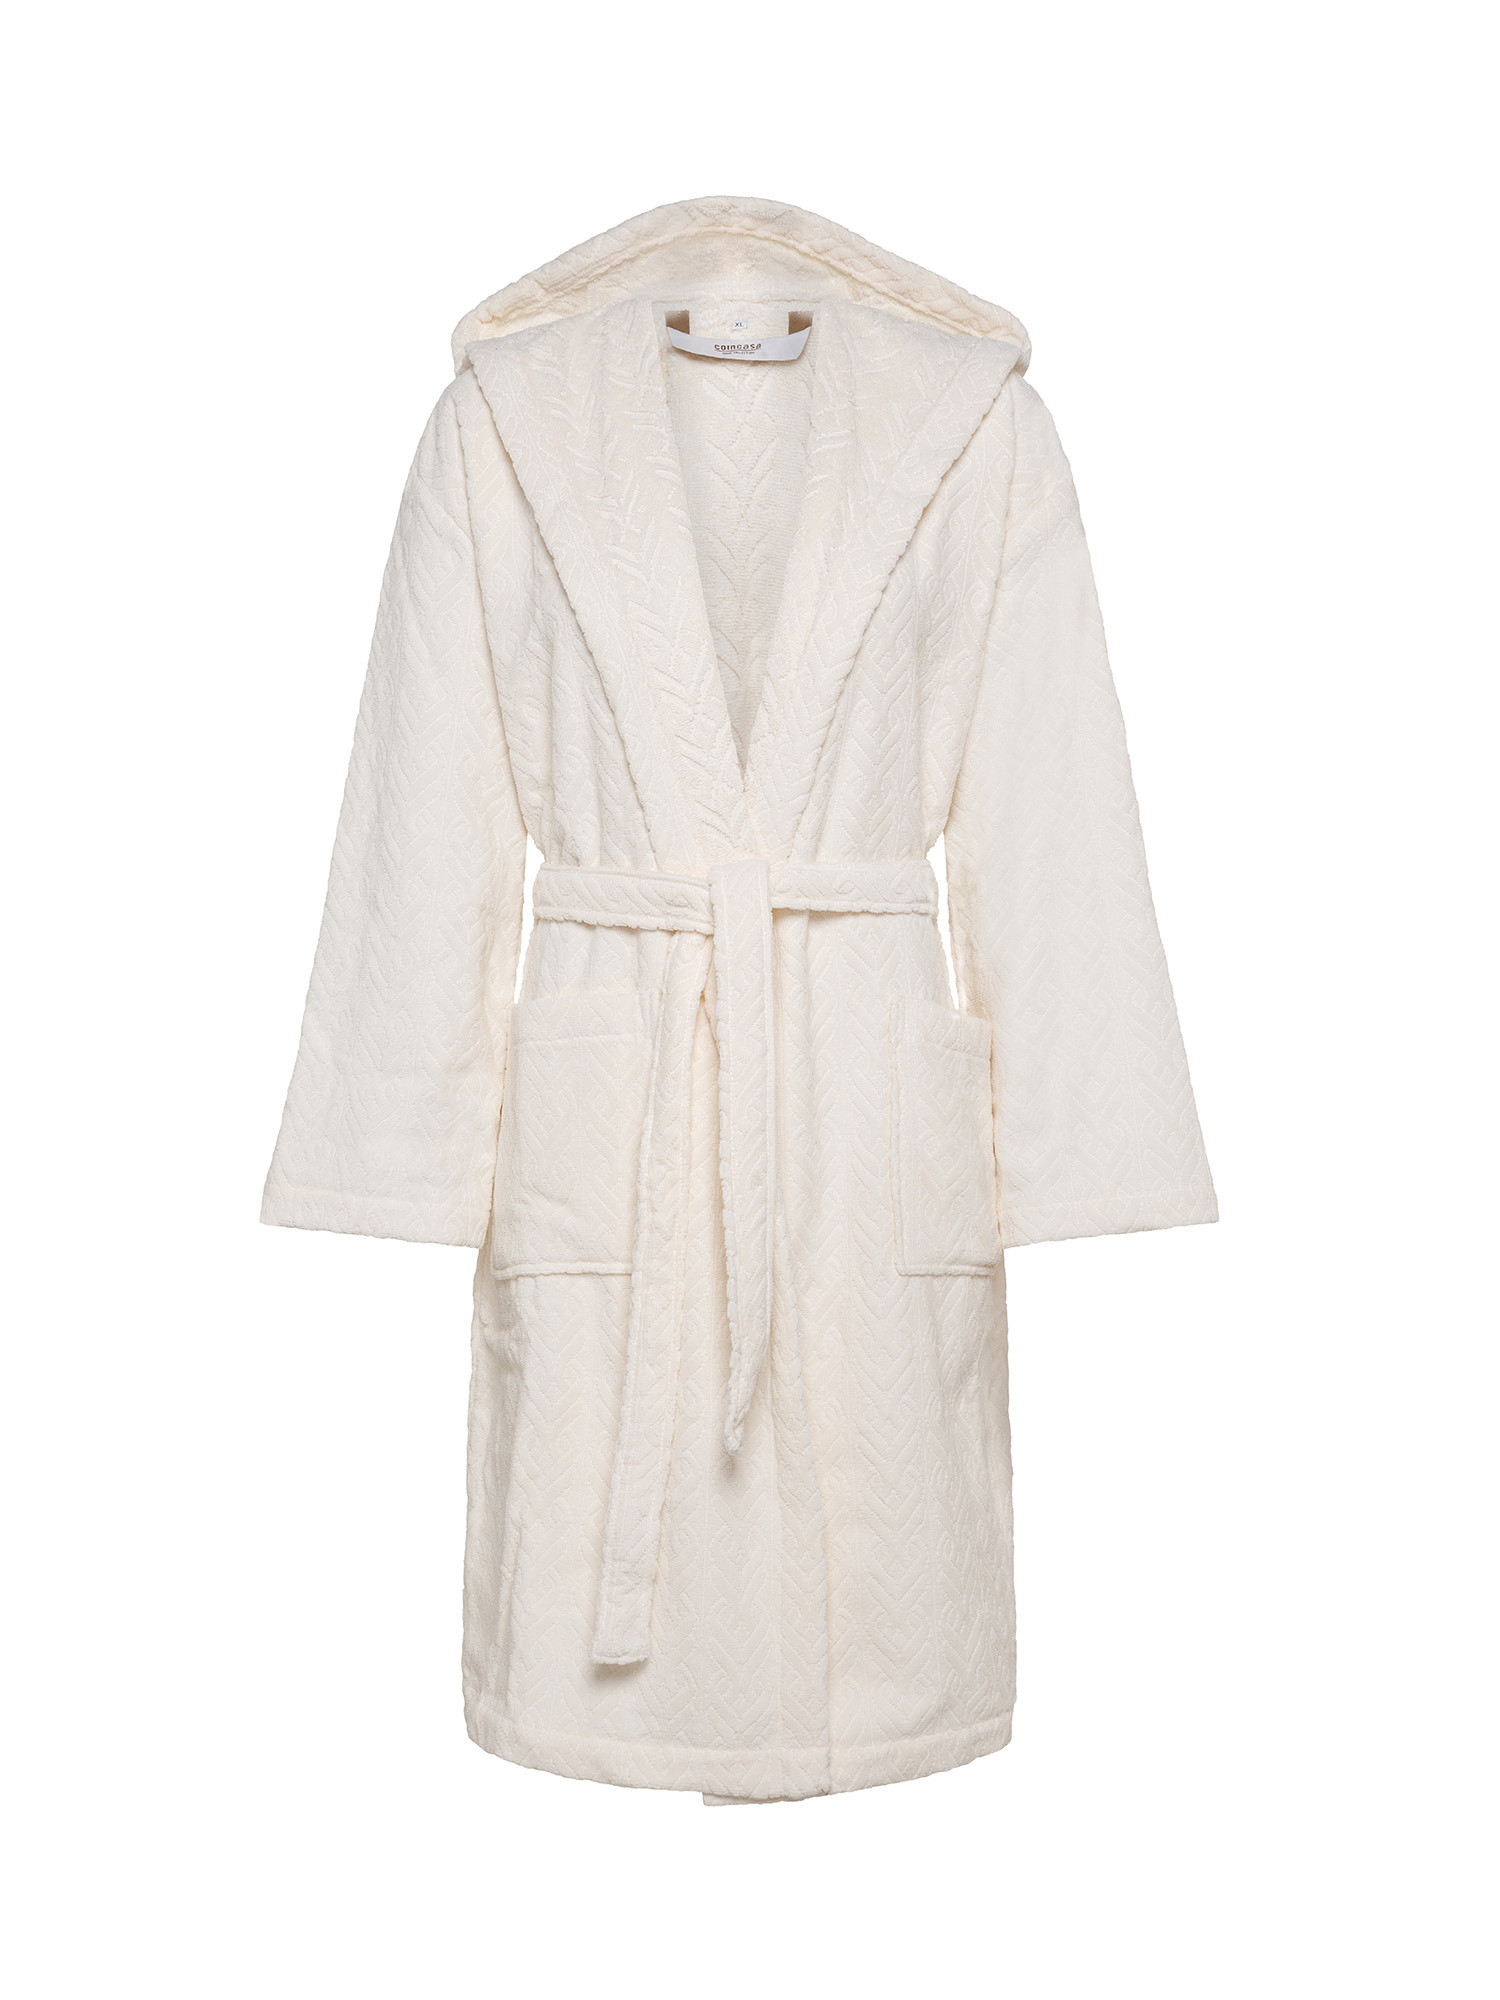 Women's bathrobe and slippers set in velor cotton terry with relief pattern, Cream, large image number 0